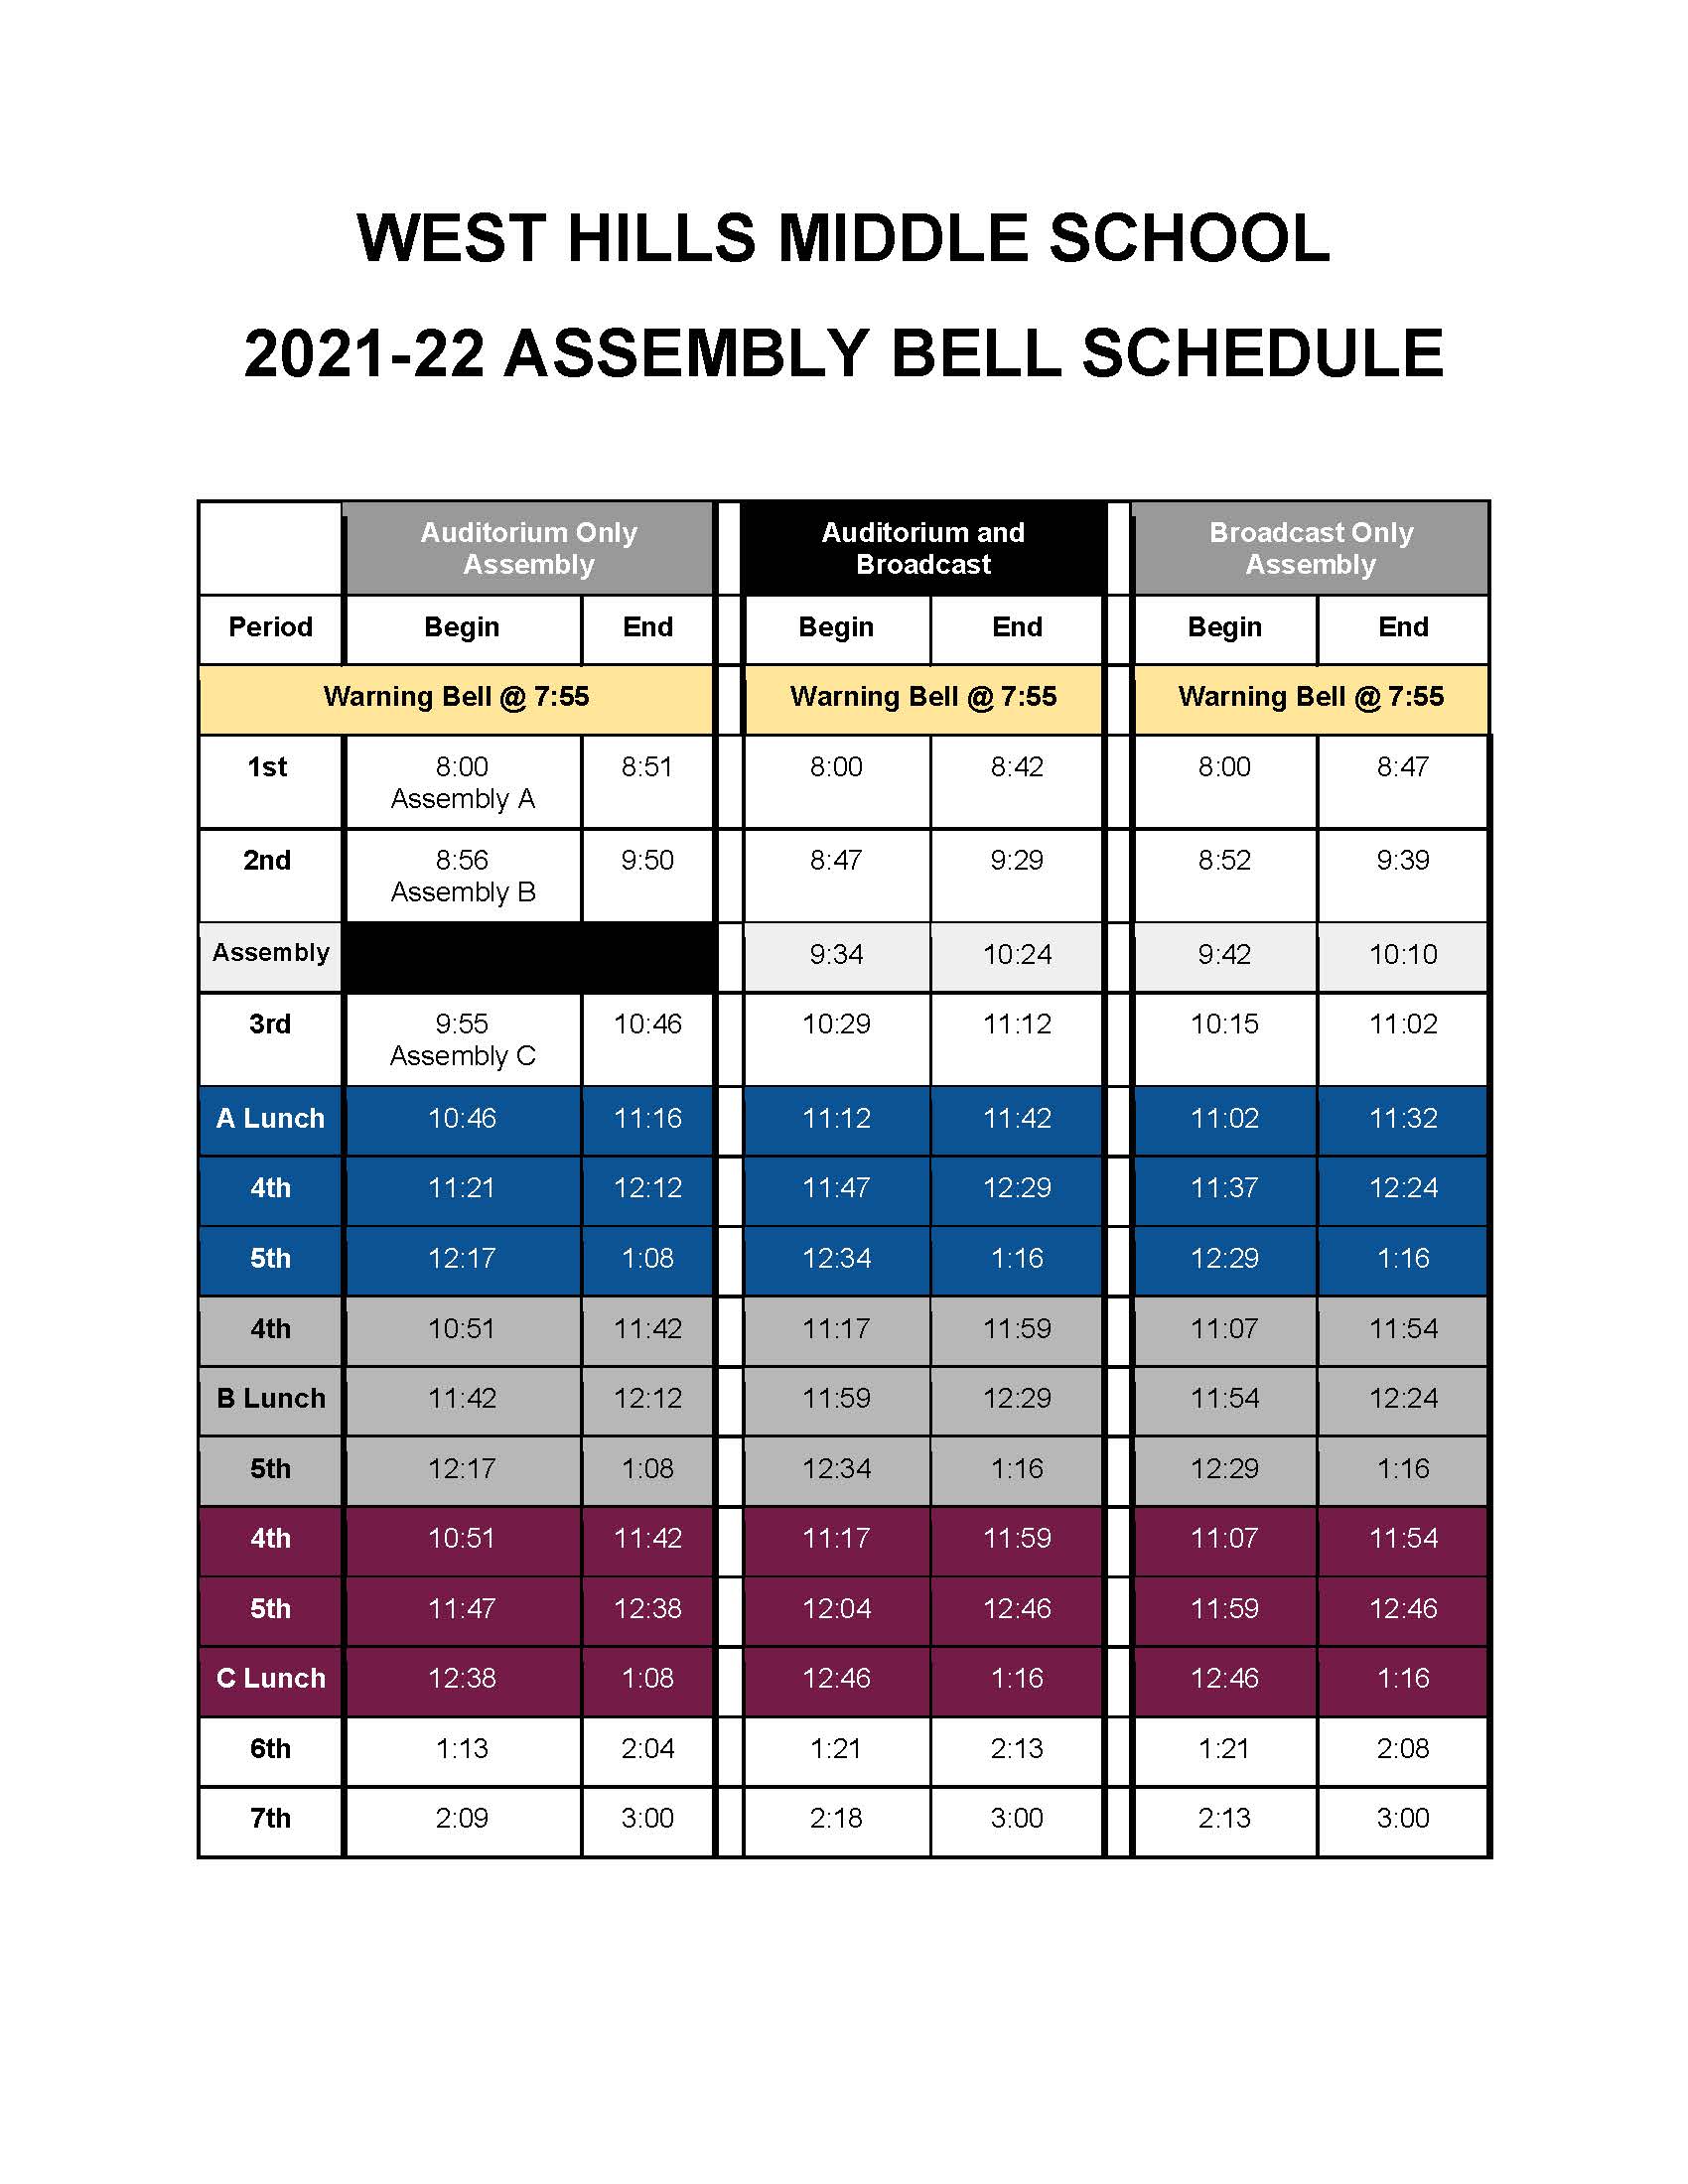 West Hills Middle School Assembly Bell Schedule